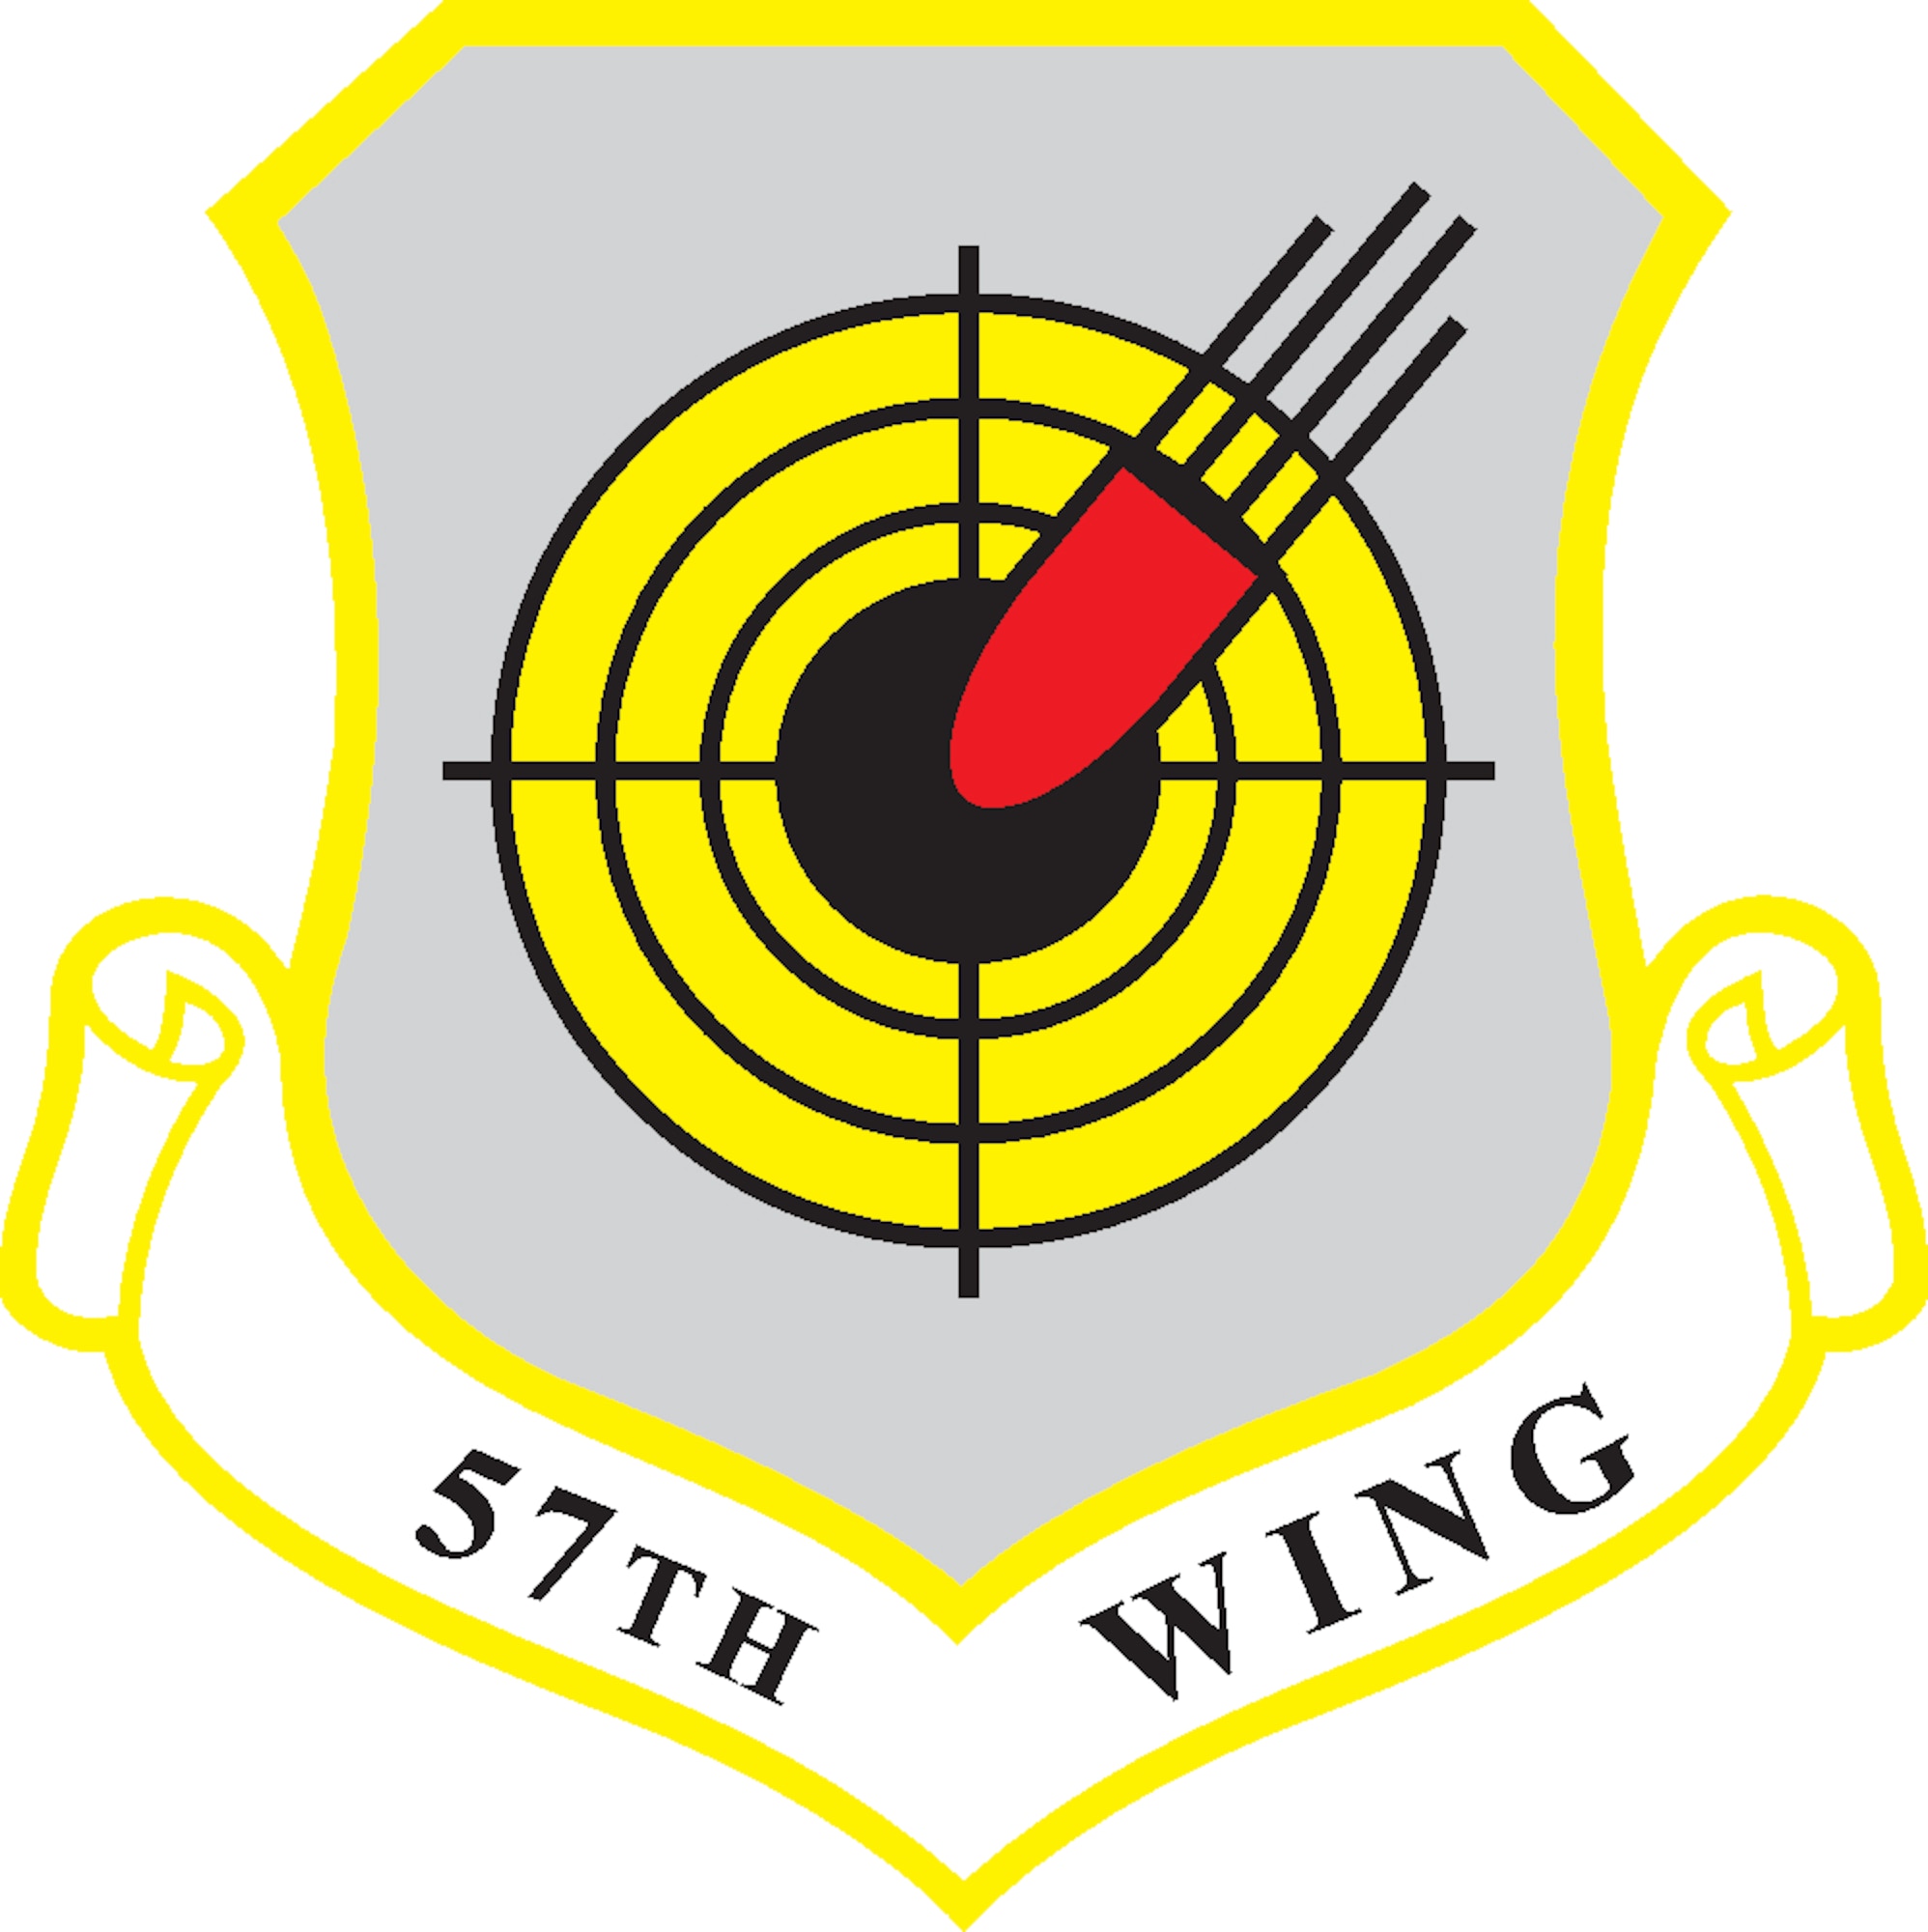 57th Wing patch